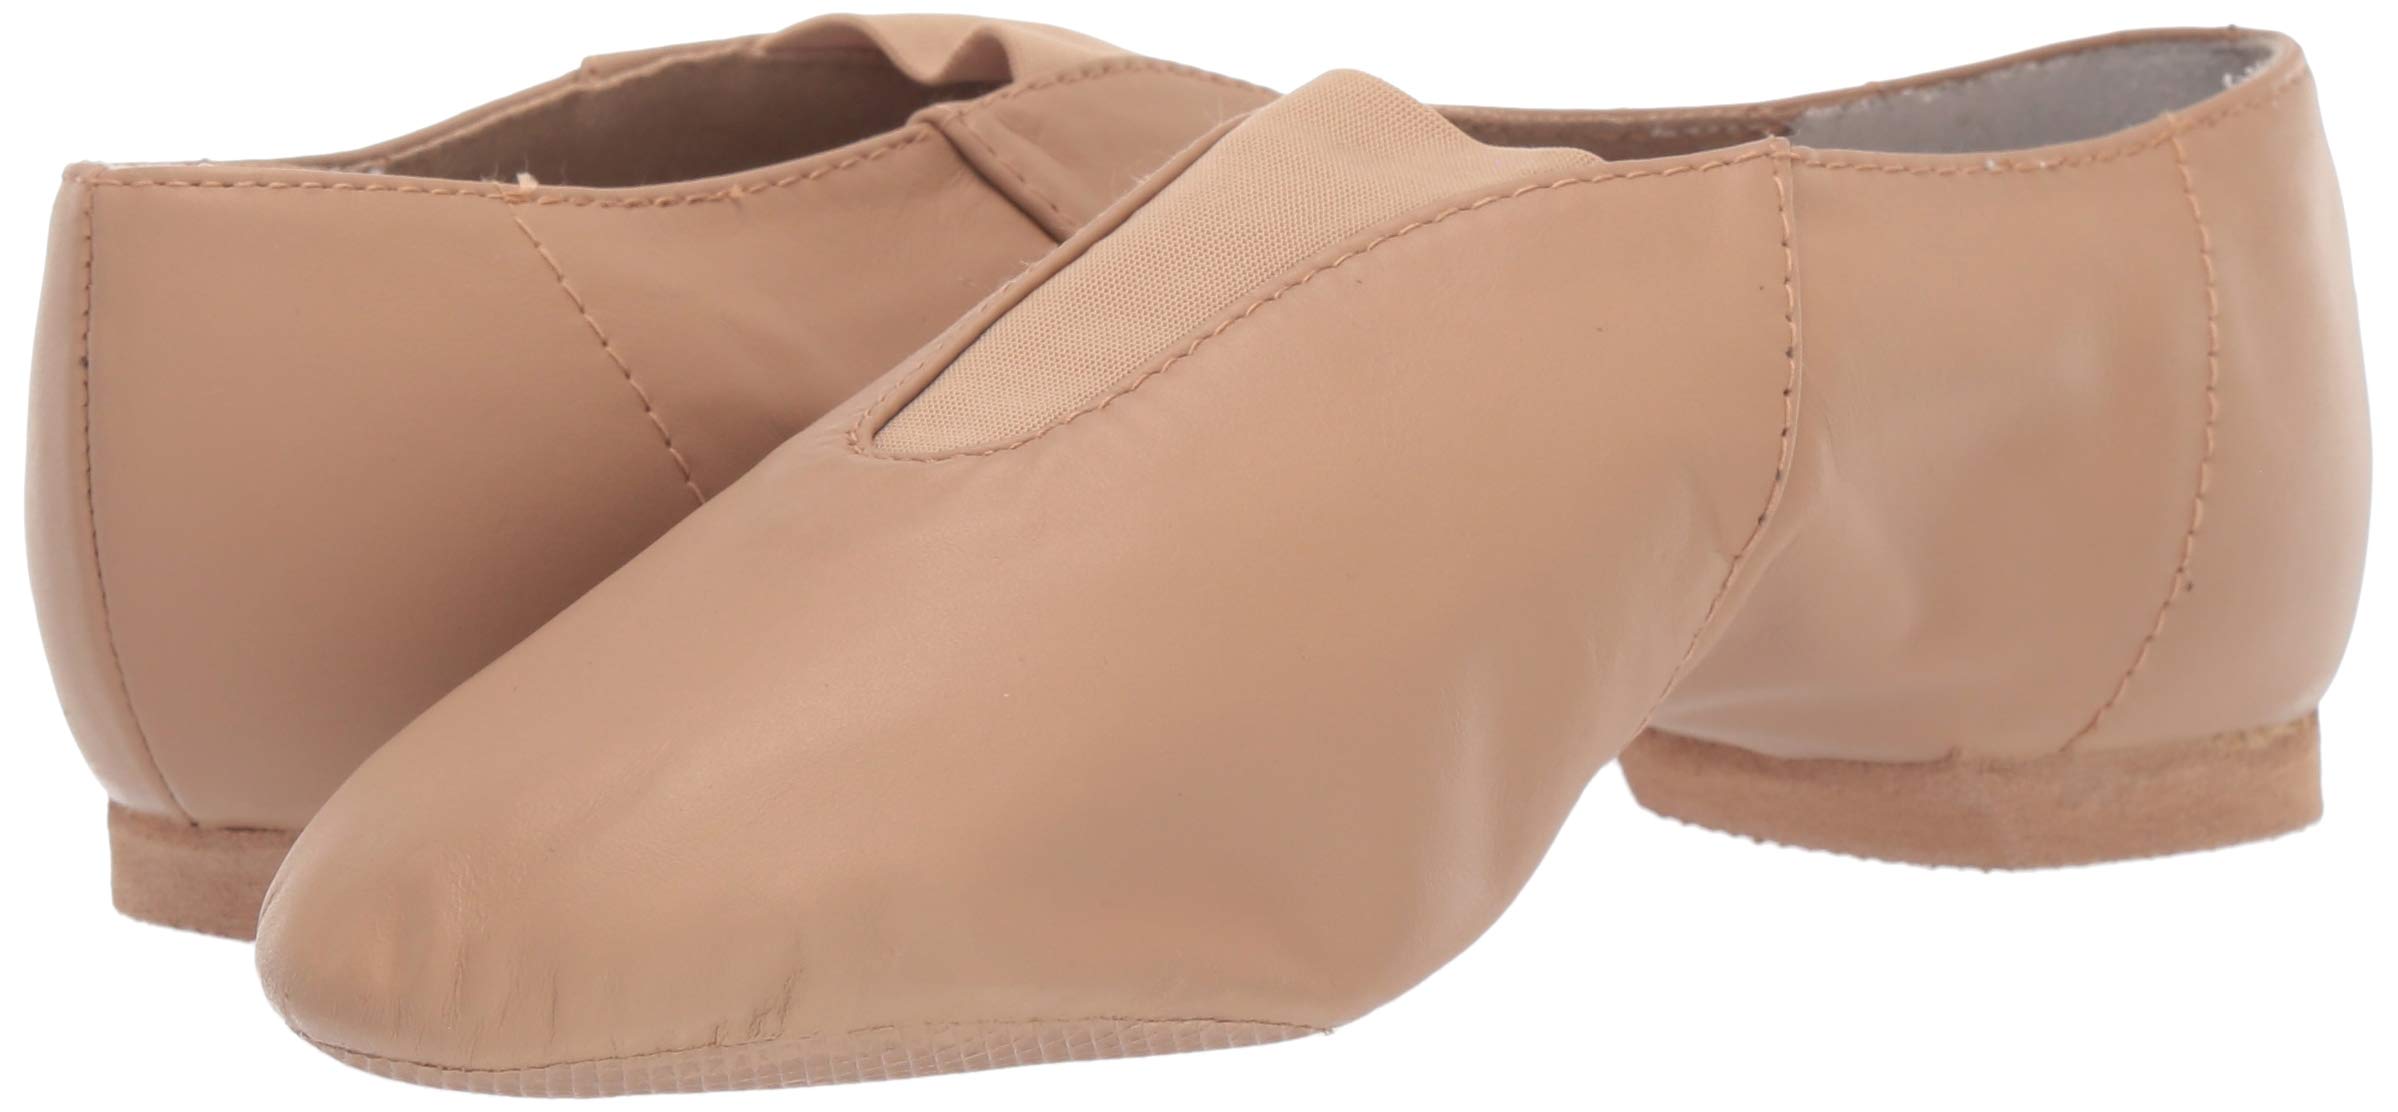 BLOCH Dance Jazz Women Shoe's Super Leather with Strong Elastic Slip On, High Durability, Neoprene Stretch Satin, Dancing Shoe